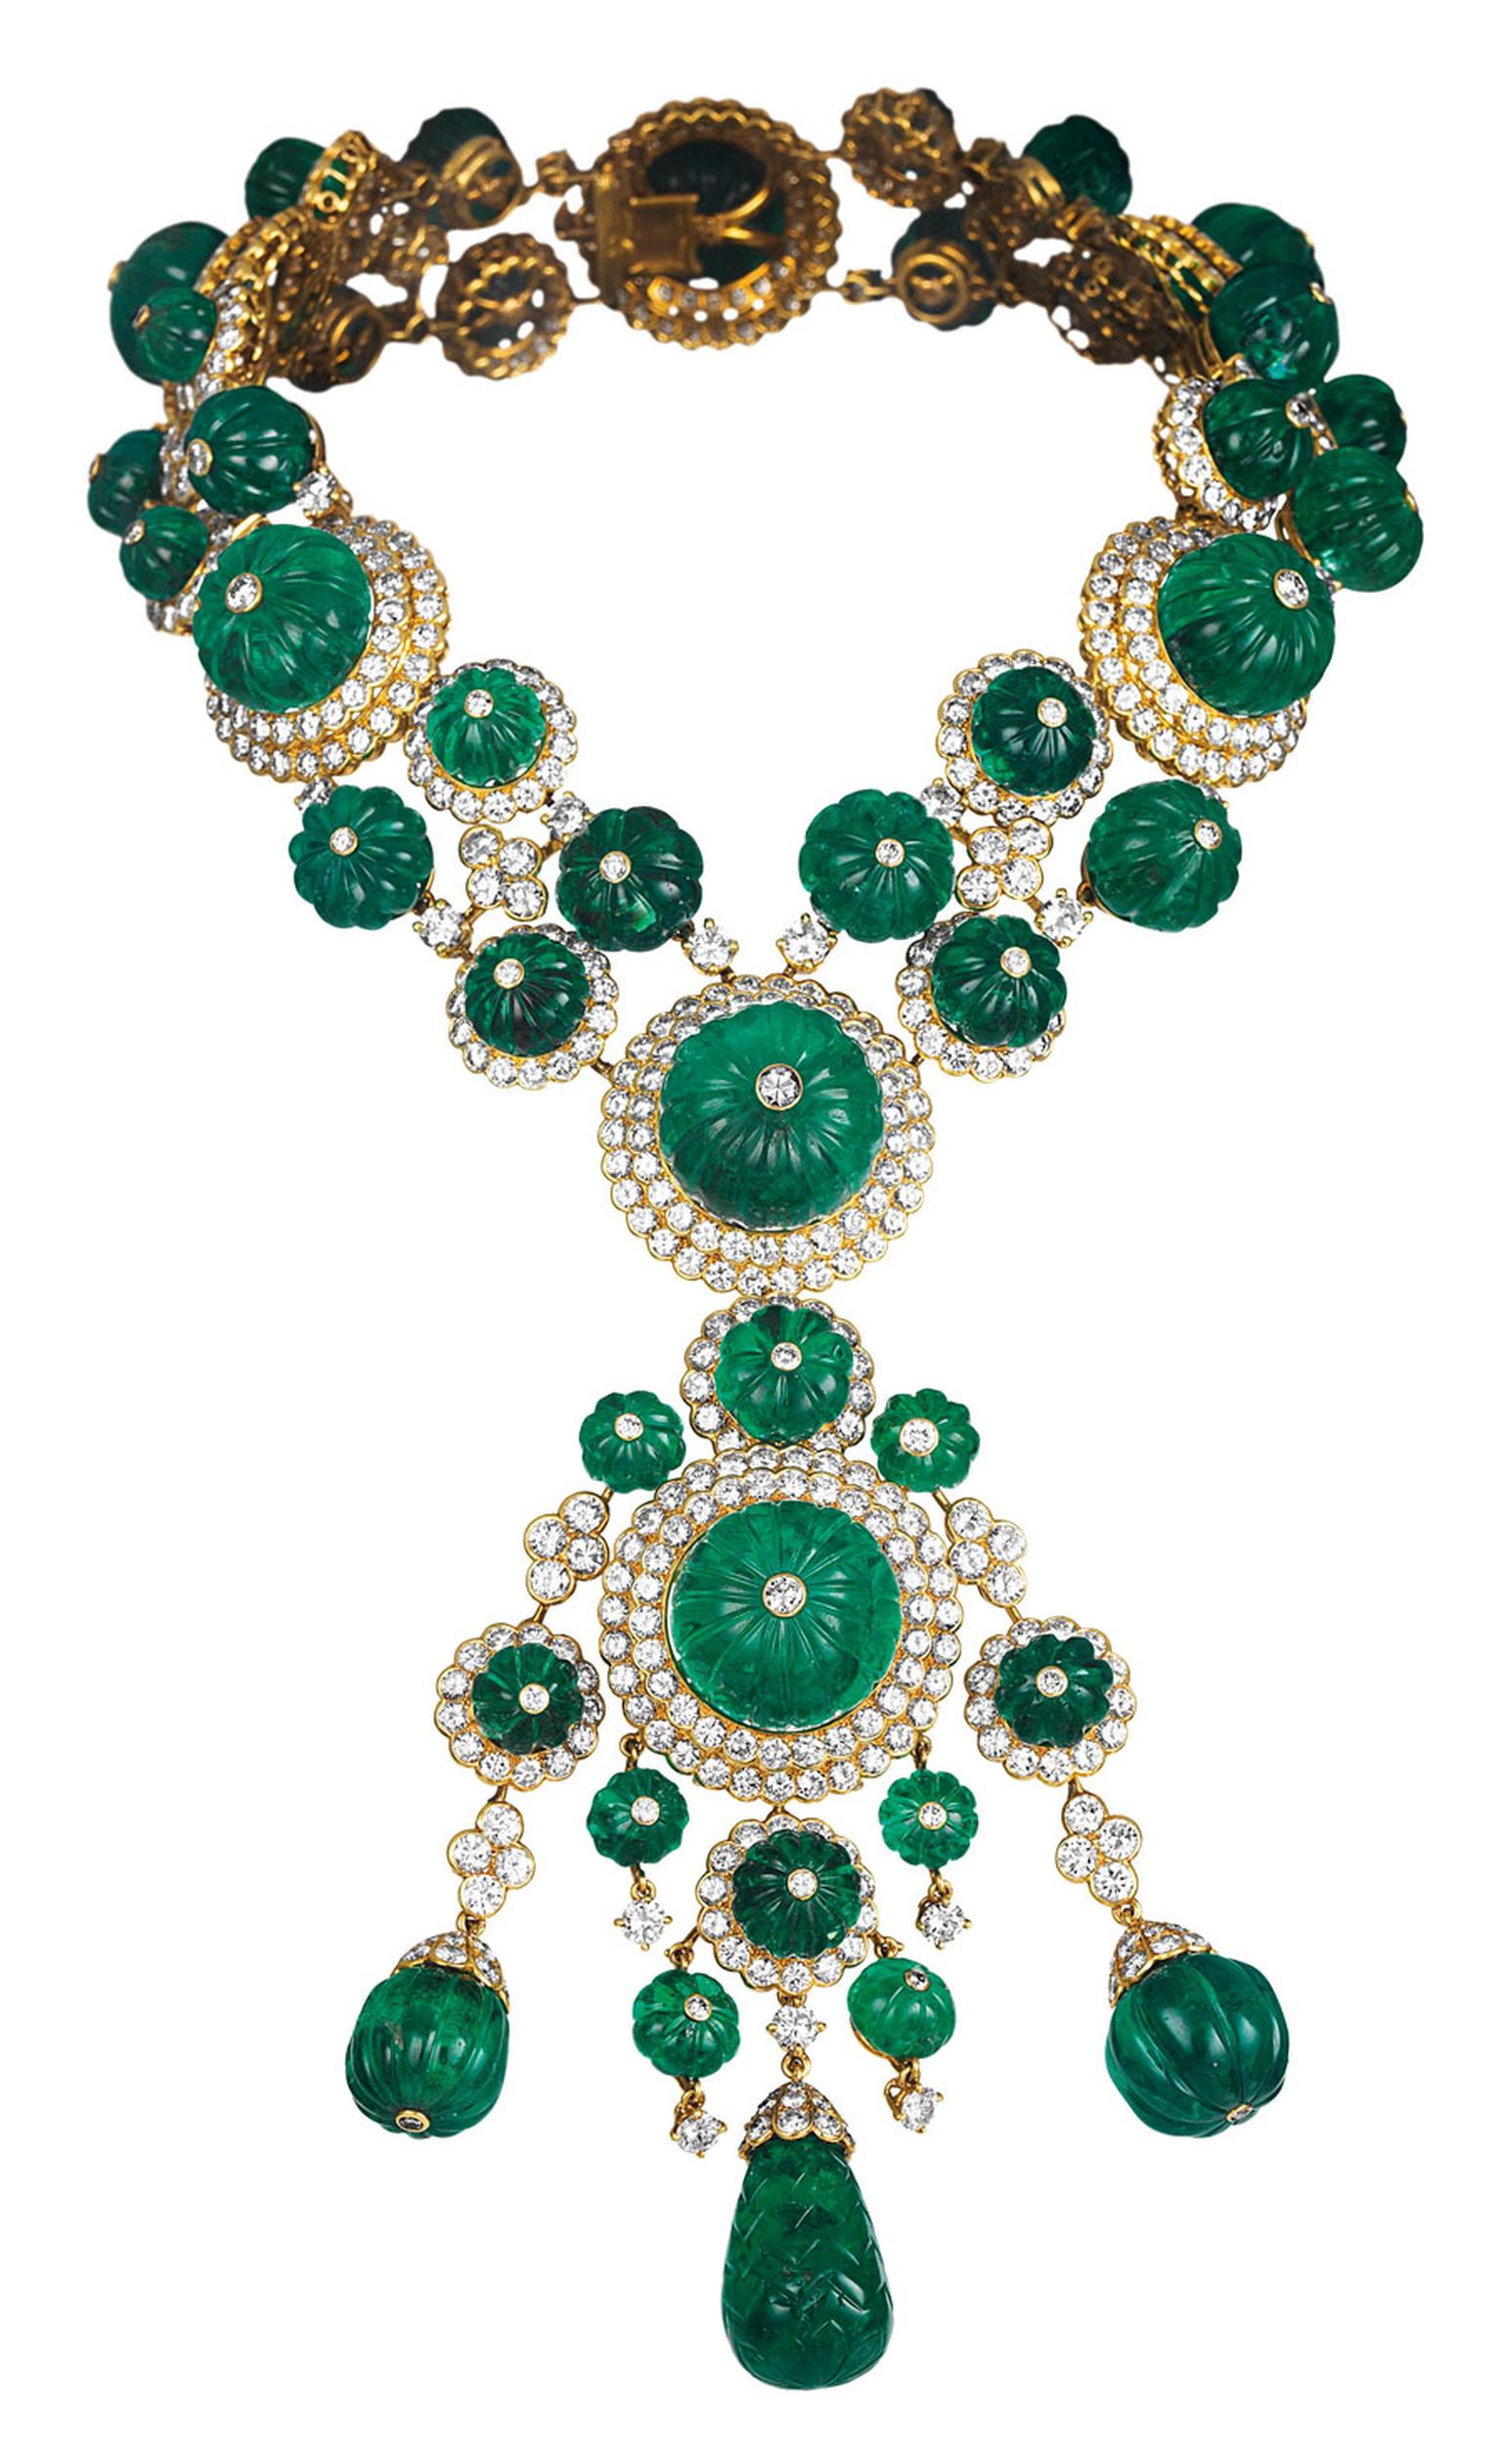 Van-Cleef-Arpels-Indian-necklace-transformable-into-two-bracelets-and-a-pendant-1971-Van-Cleef-Arpels-Collection_1